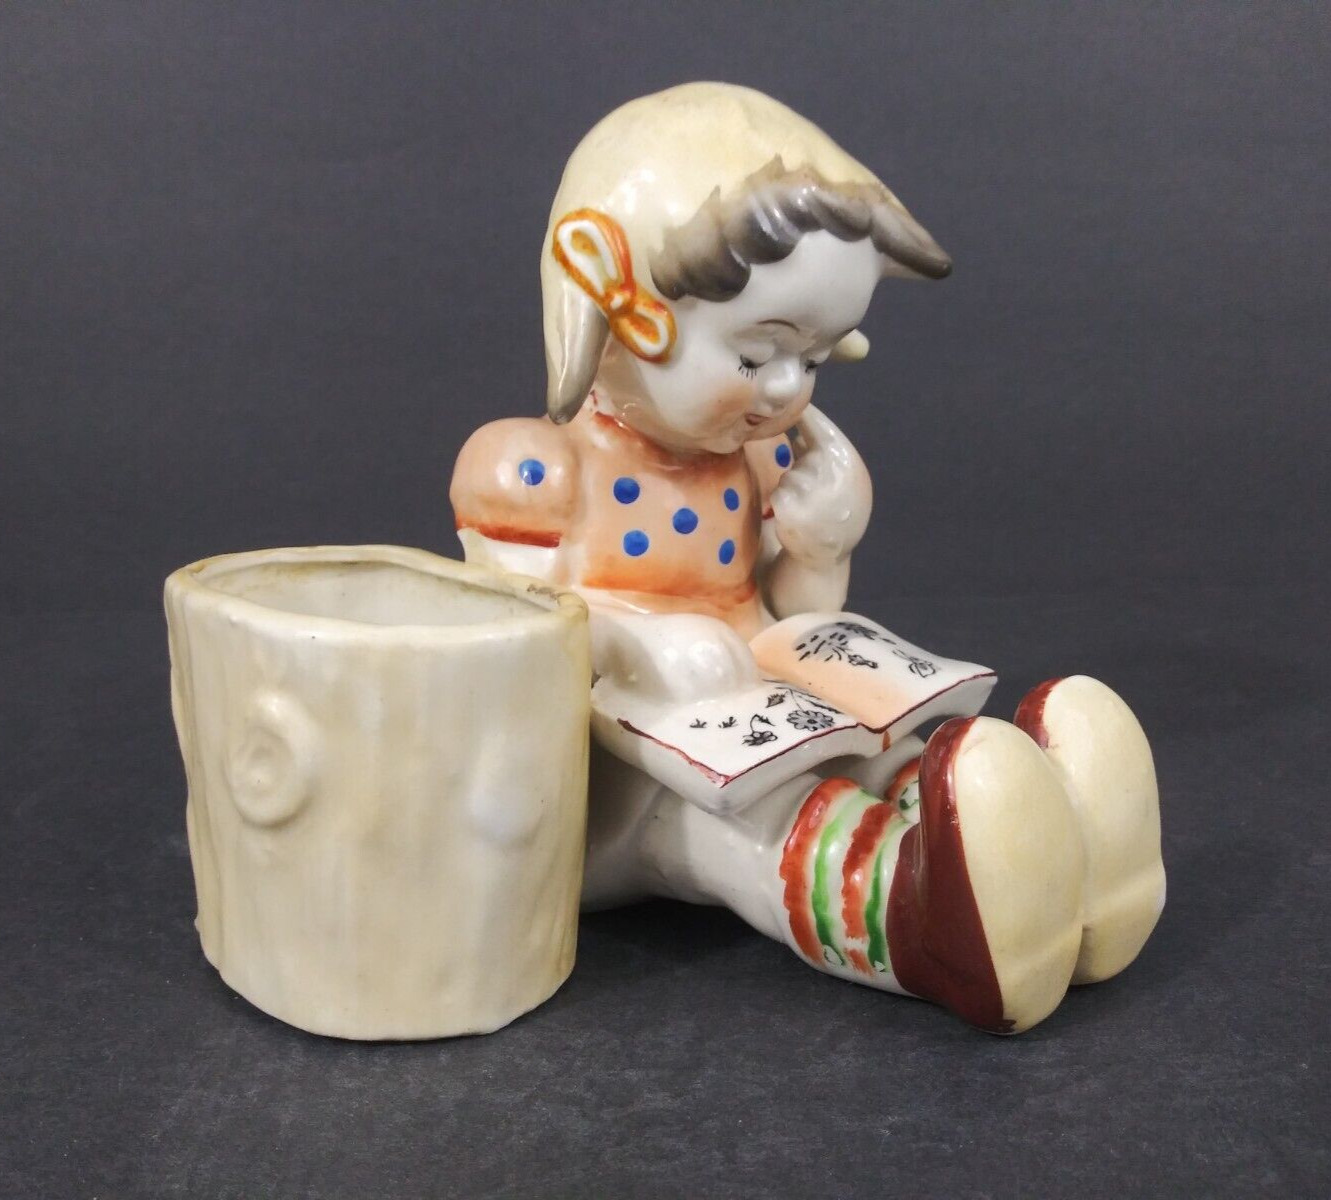 Vintage Occupied Japan Hand Painted Ceramic Sitting Girl Reading Figural Planter